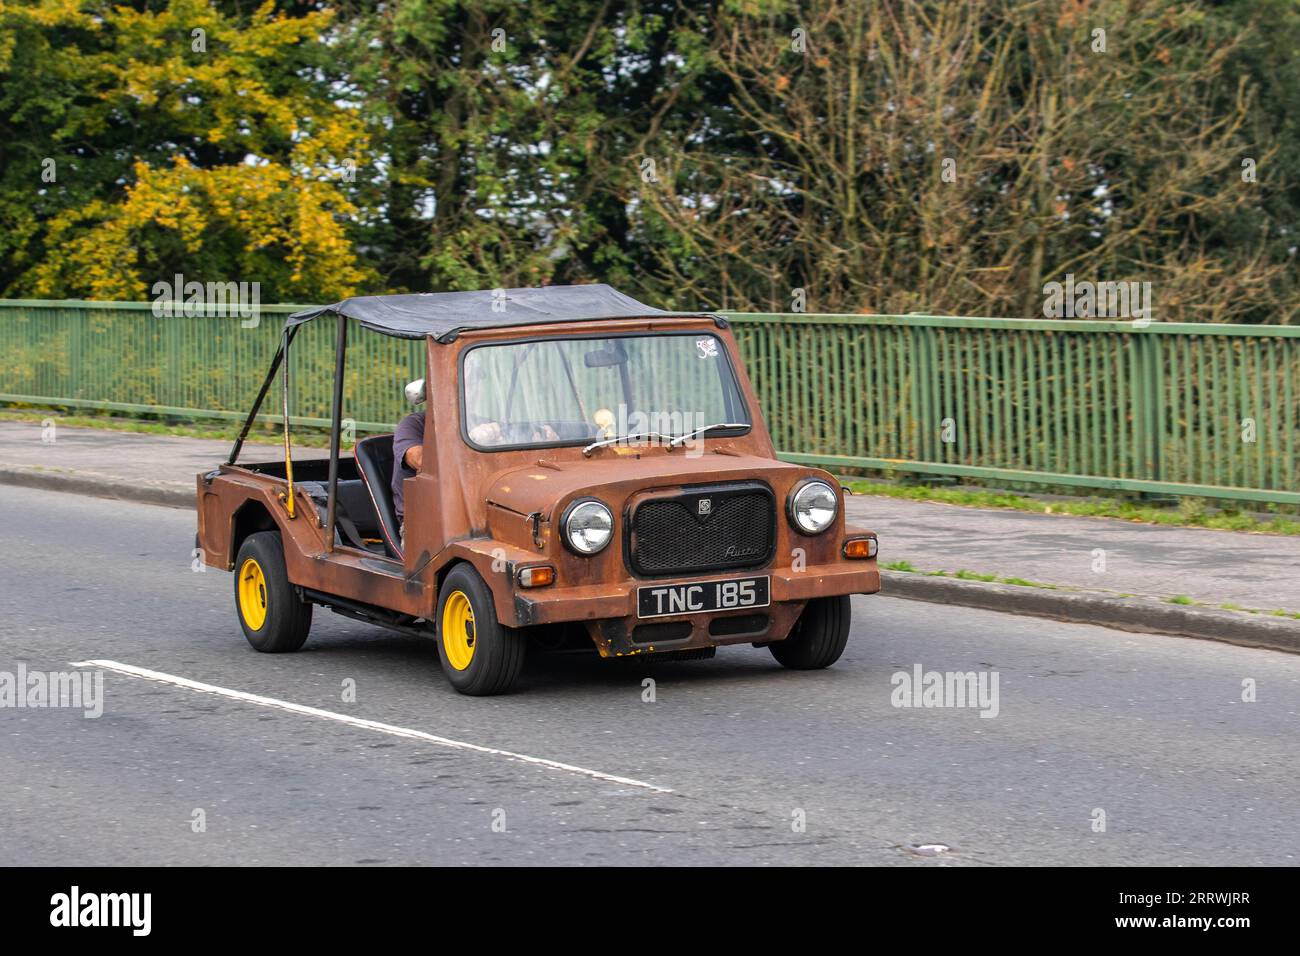 1960s Austin Mini Moke Style dilapidated brown open vehicle, a small, front-wheel-drive utility and recreational convertible. Front-engine, front-wheel drive, 850cc, four cylinders,45bhp British Classic. Stock Photo